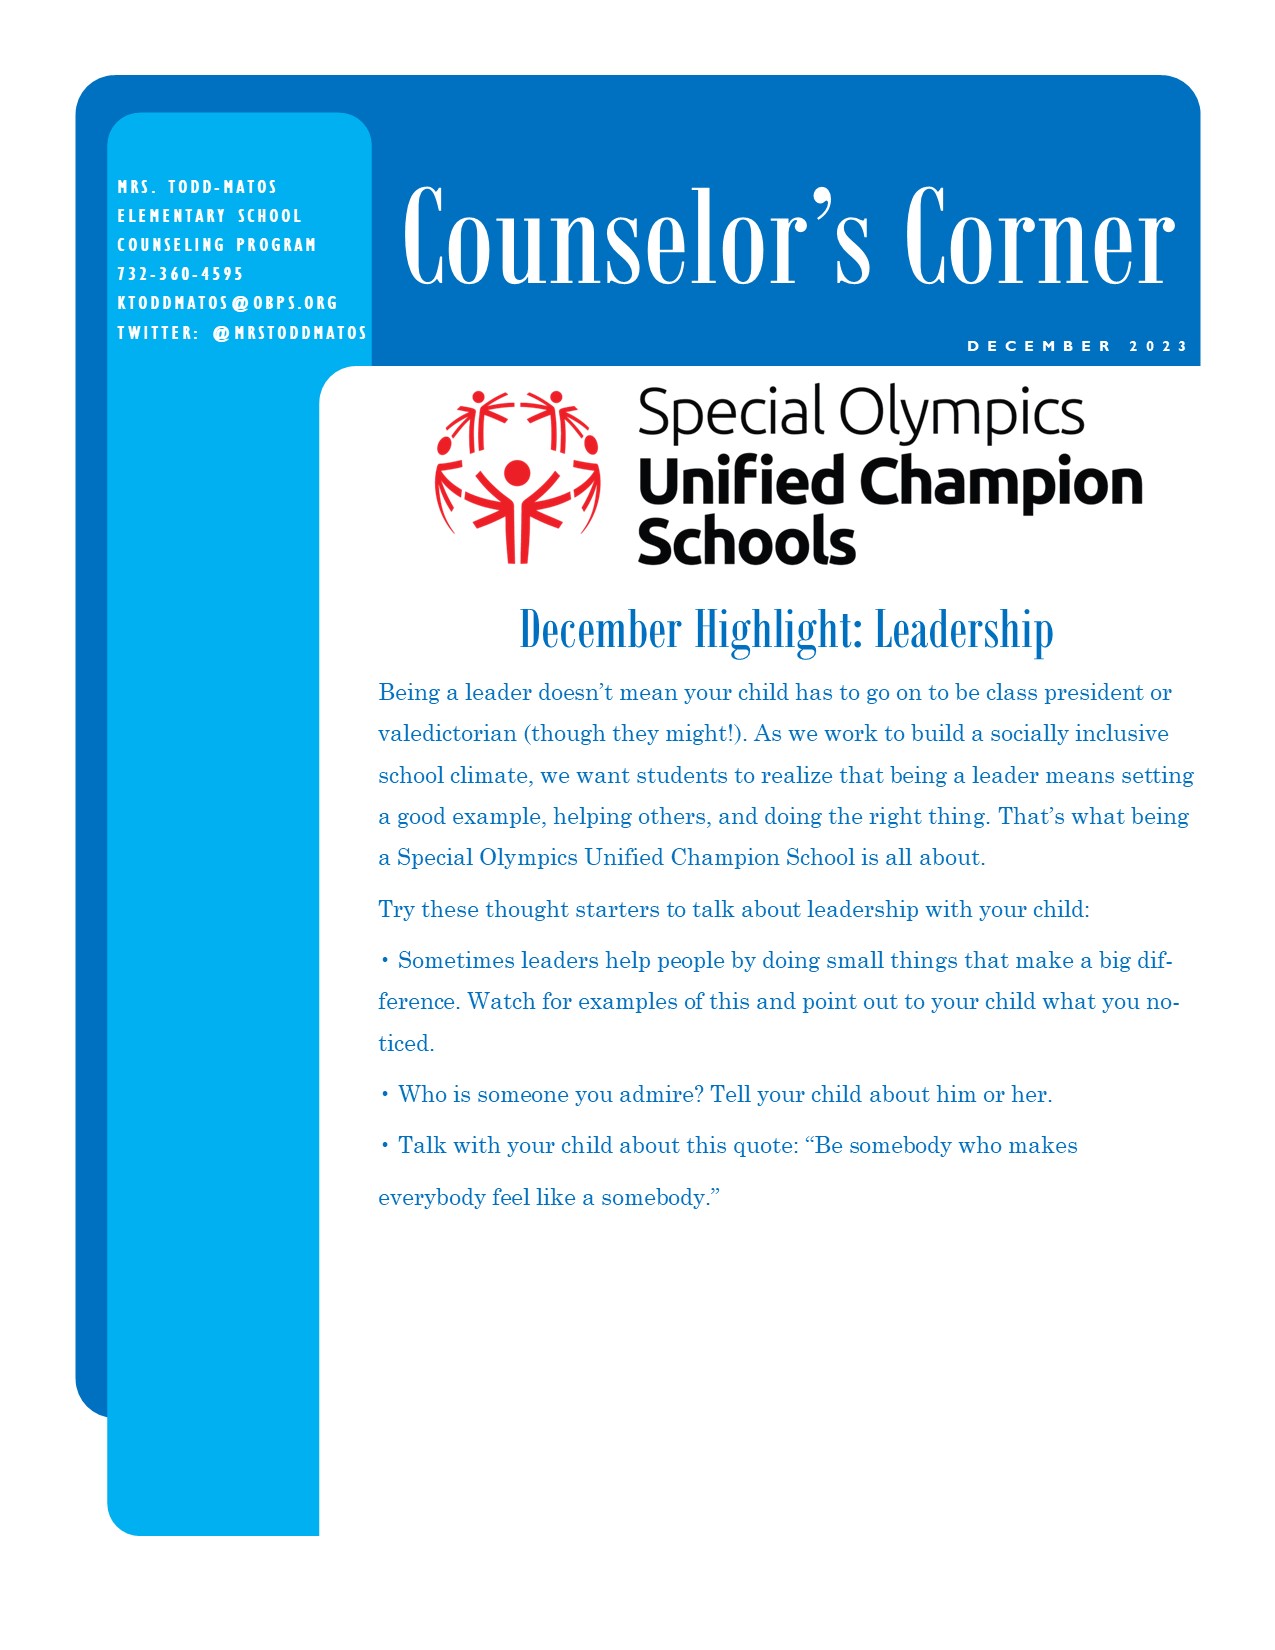 School Counselor December Newsletter Page 2